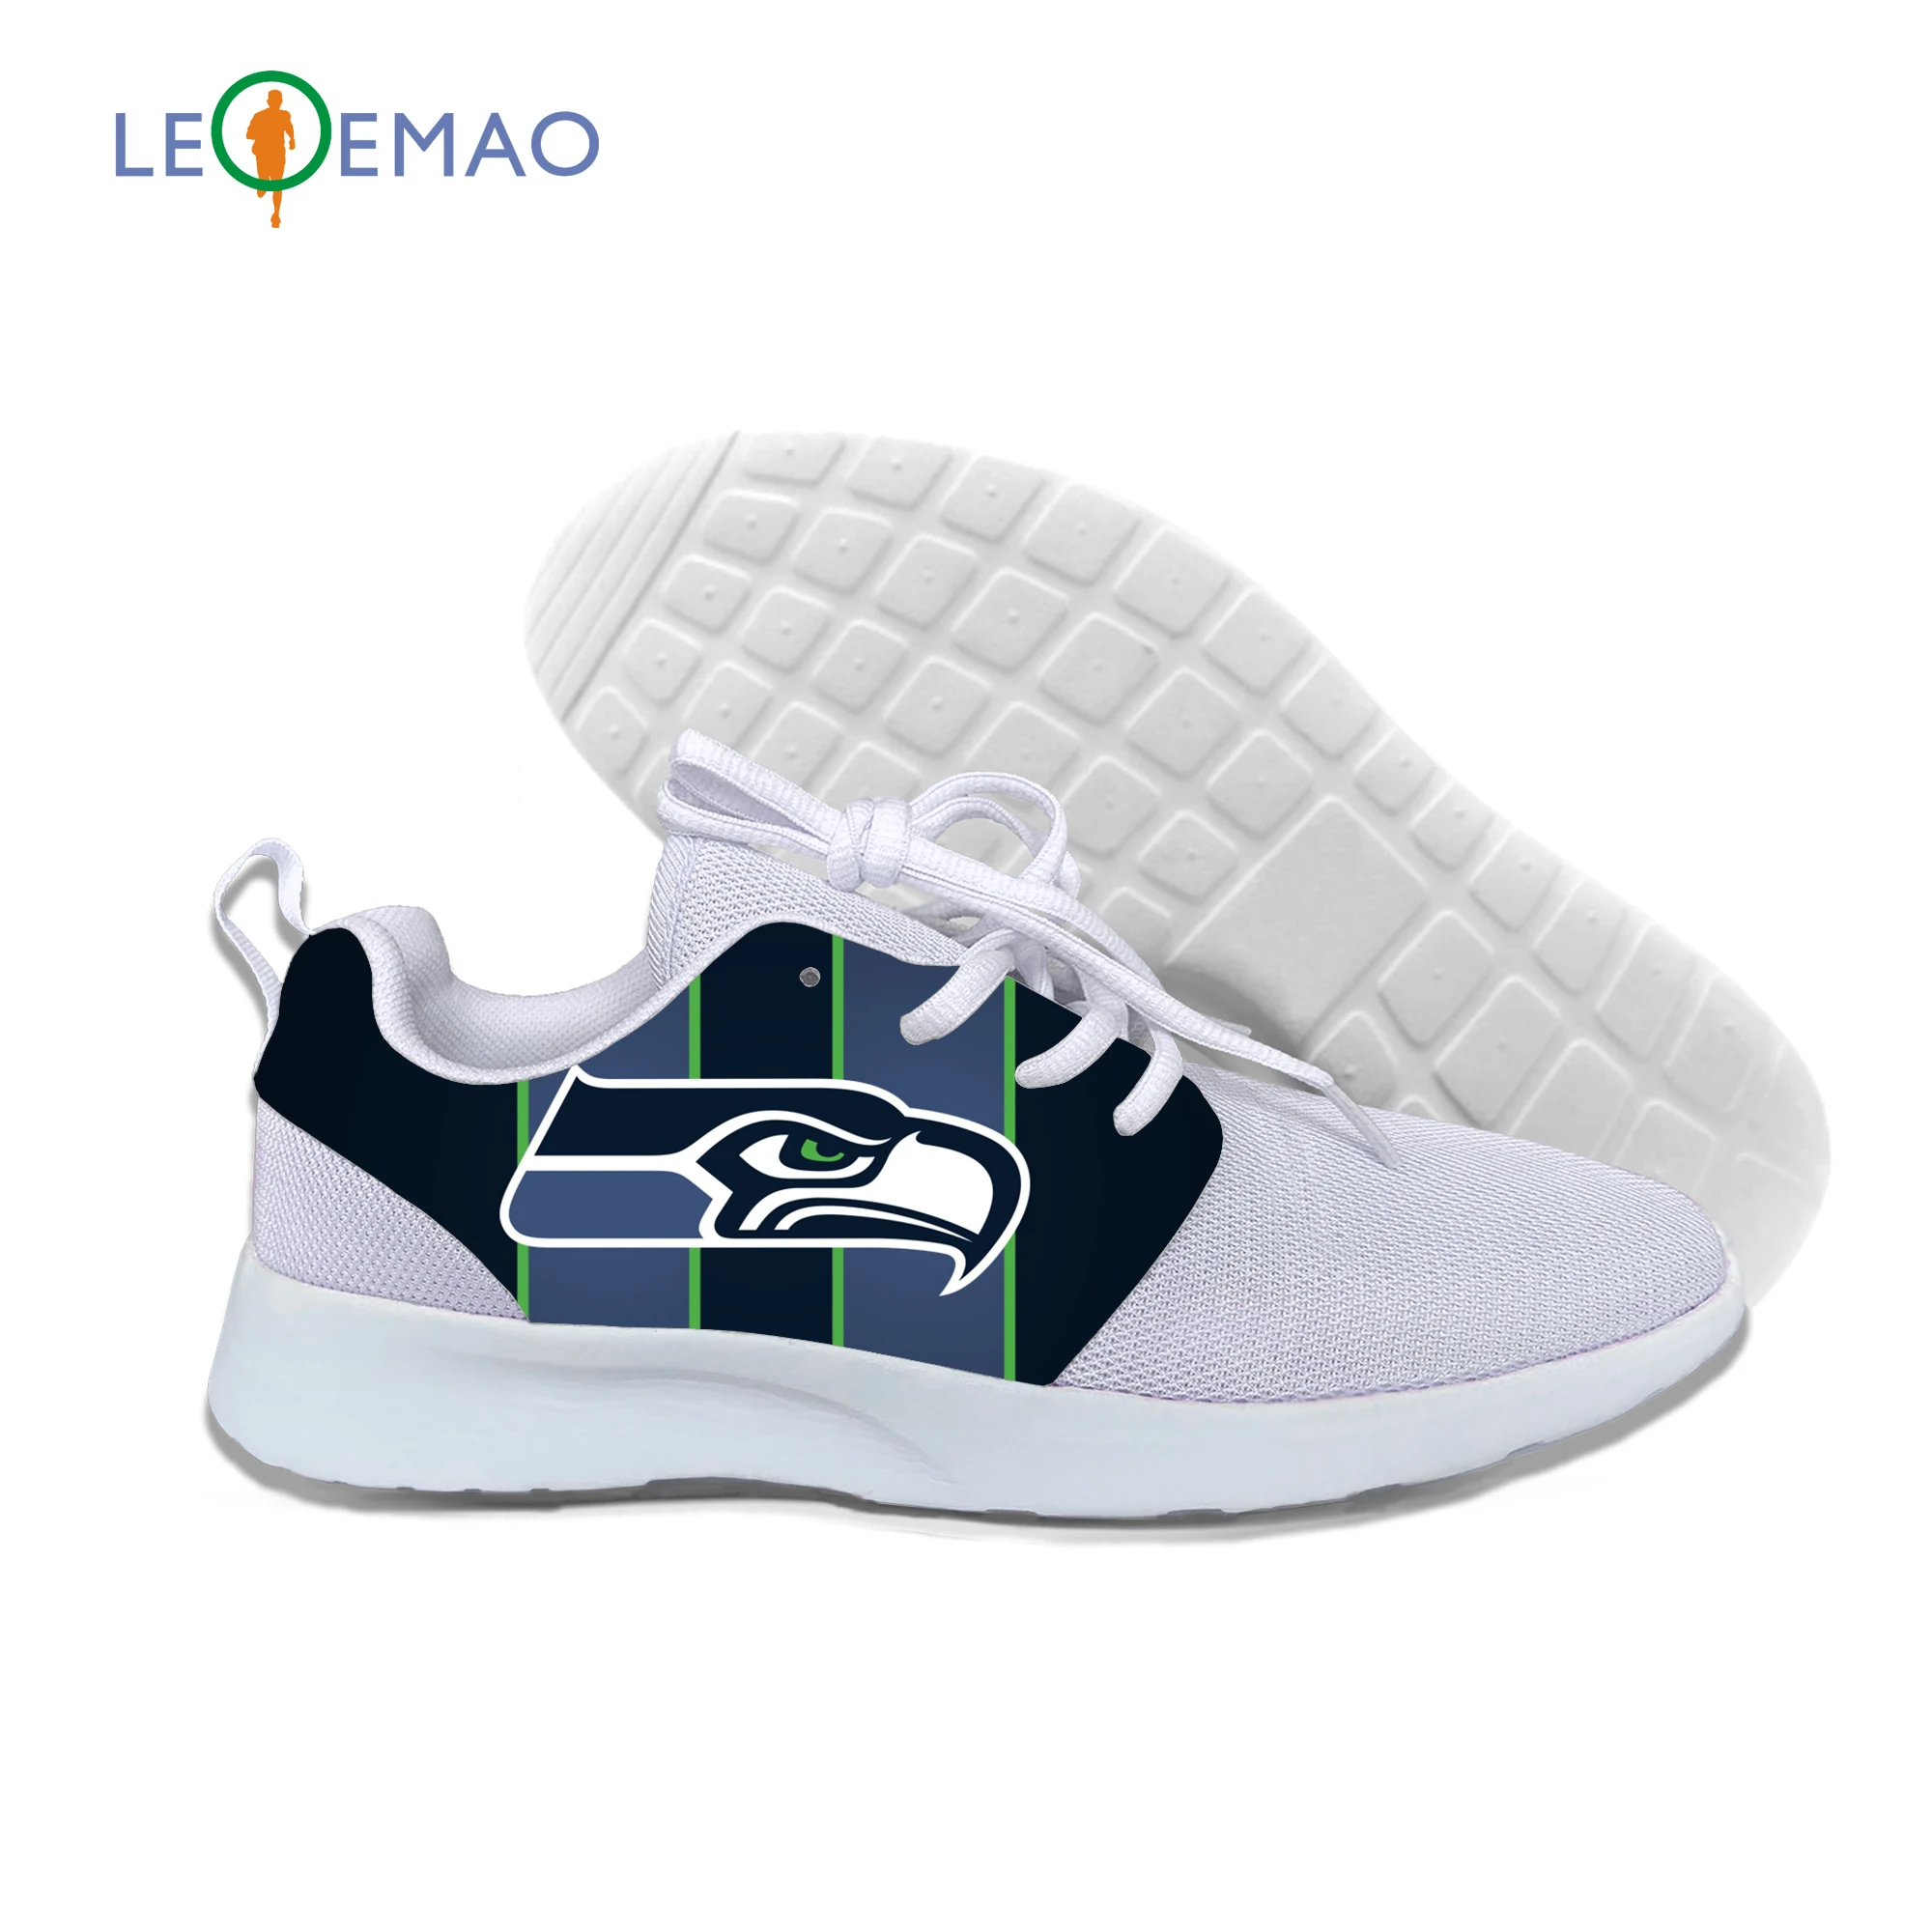 

Men Women Low Top Mesh Shoes For Seahawks Image Custom Flats Sneakers For Seattle Football Fans Black White Pink Shoes